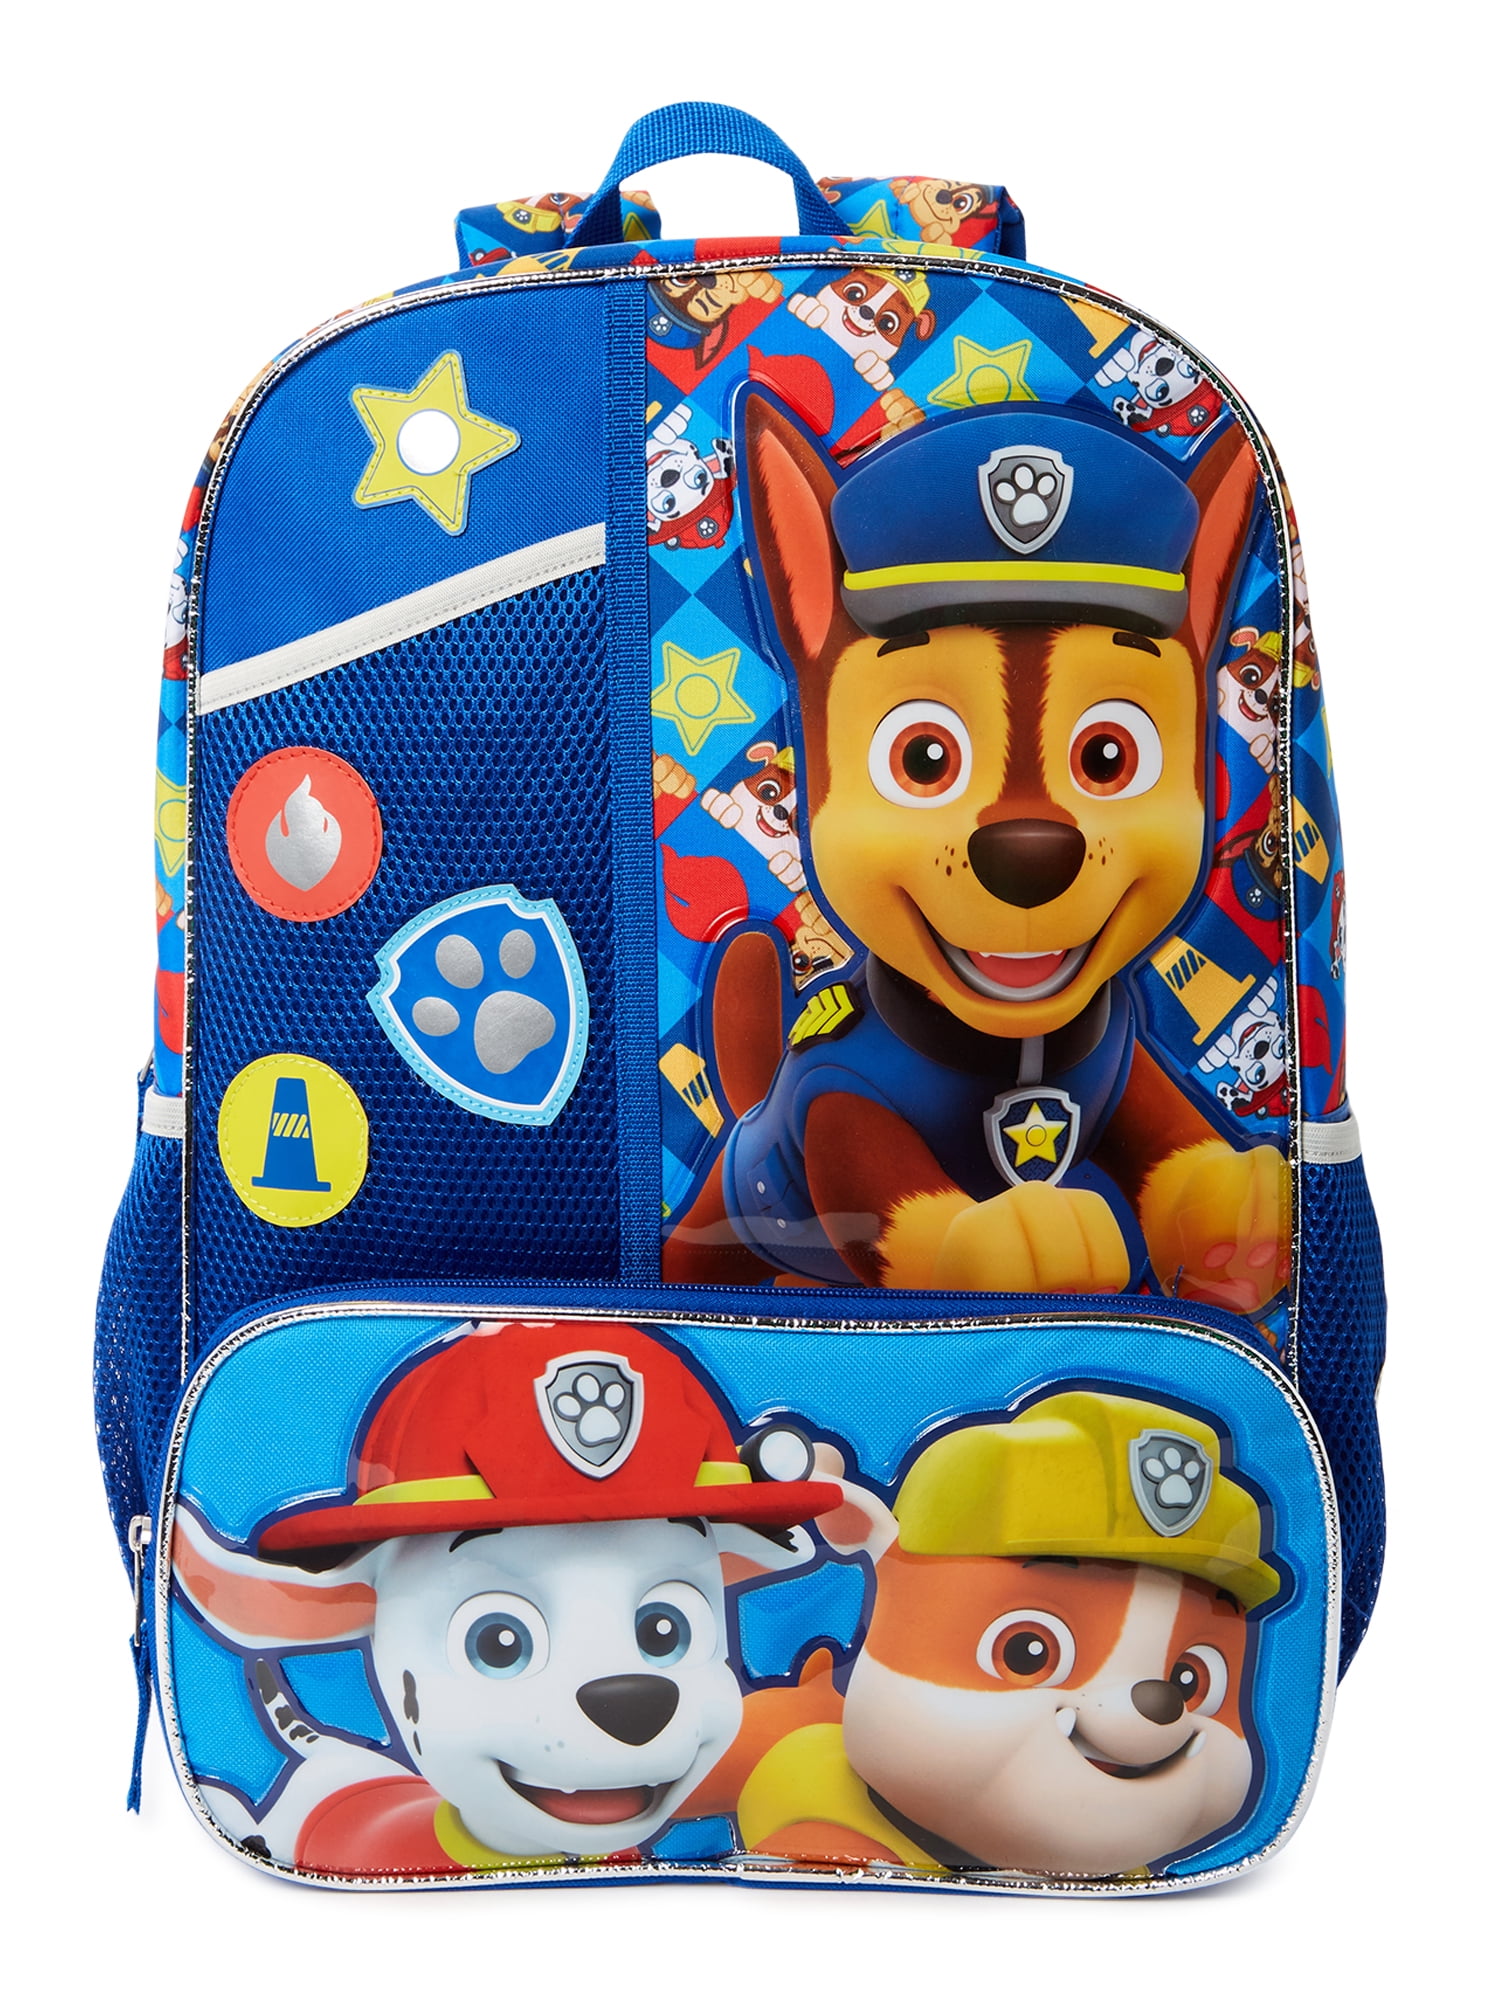 OFFICIAL LICENSED 17" PAW PATROL CHILDRENS BACKPACK CHILDS PAW PATROL SCHOOL BAG 